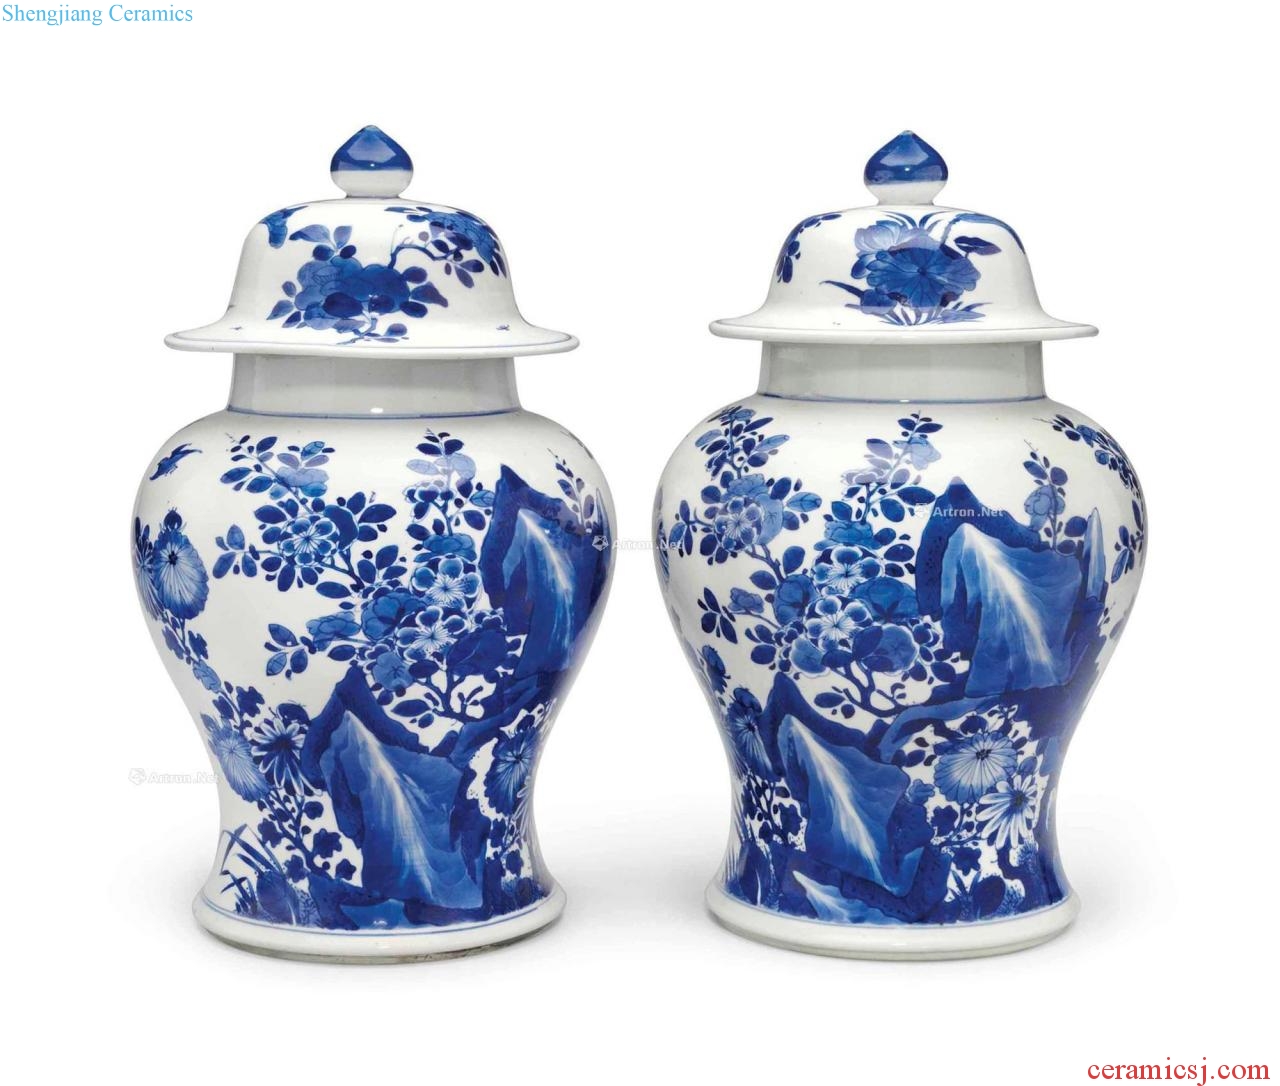 Kangxi period (1662-1722), A PAIR OF BLUE AND WHITE JARS AND COVERS